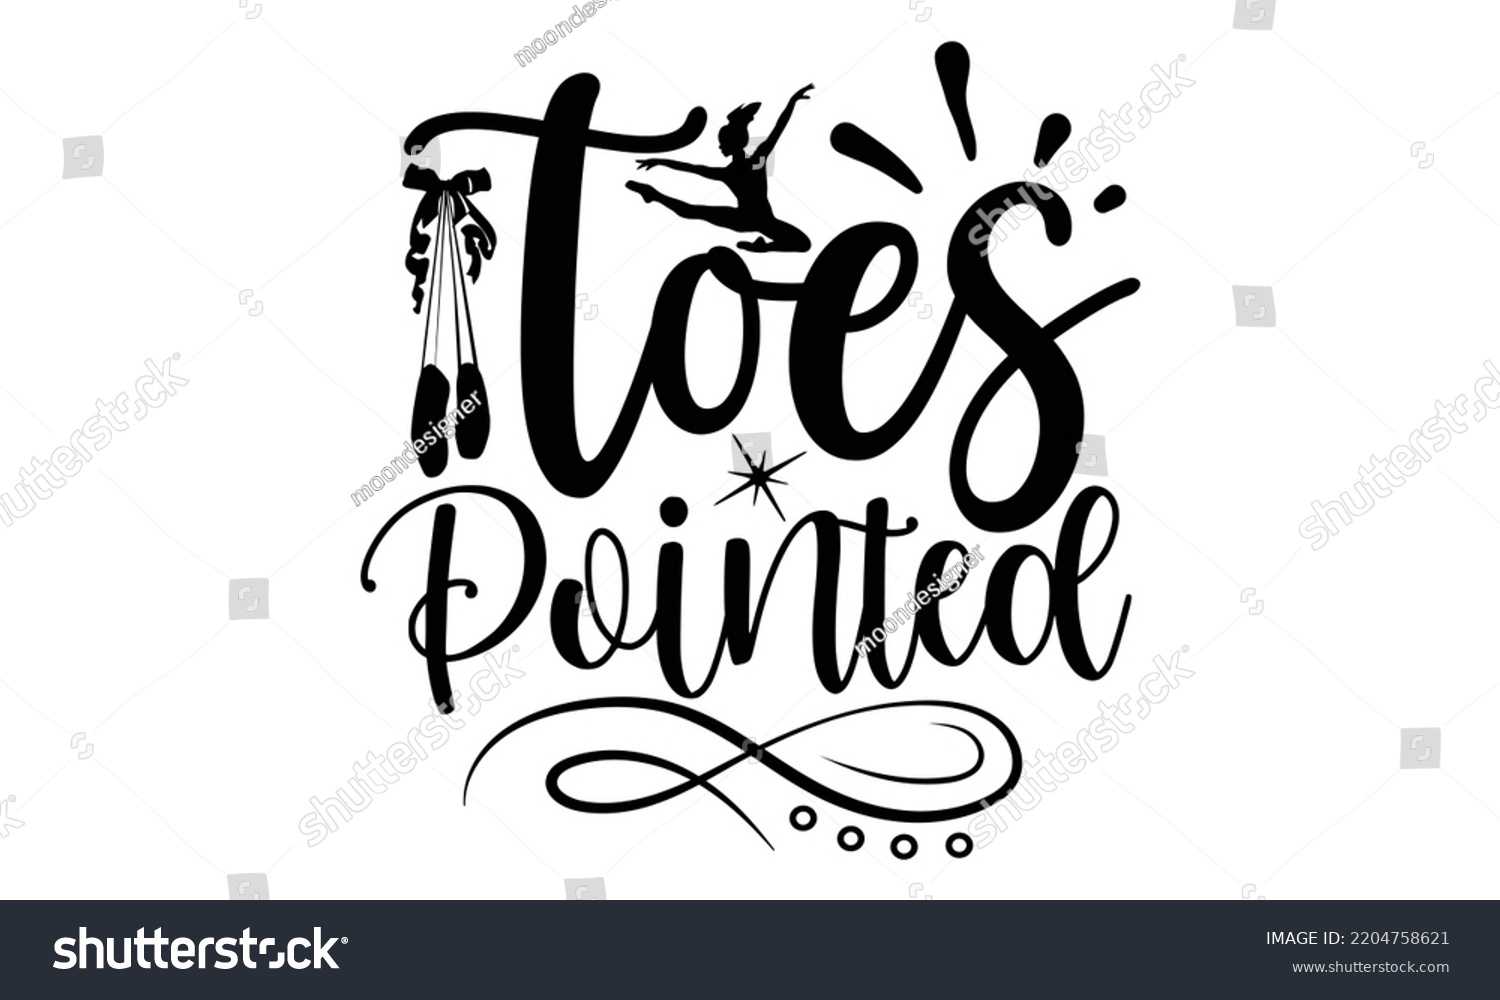 SVG of toes pointed - Ballet svg t shirt design, ballet SVG Cut Files, Girl Ballet Design, Hand drawn lettering phrase and vector sign, EPS 10 svg